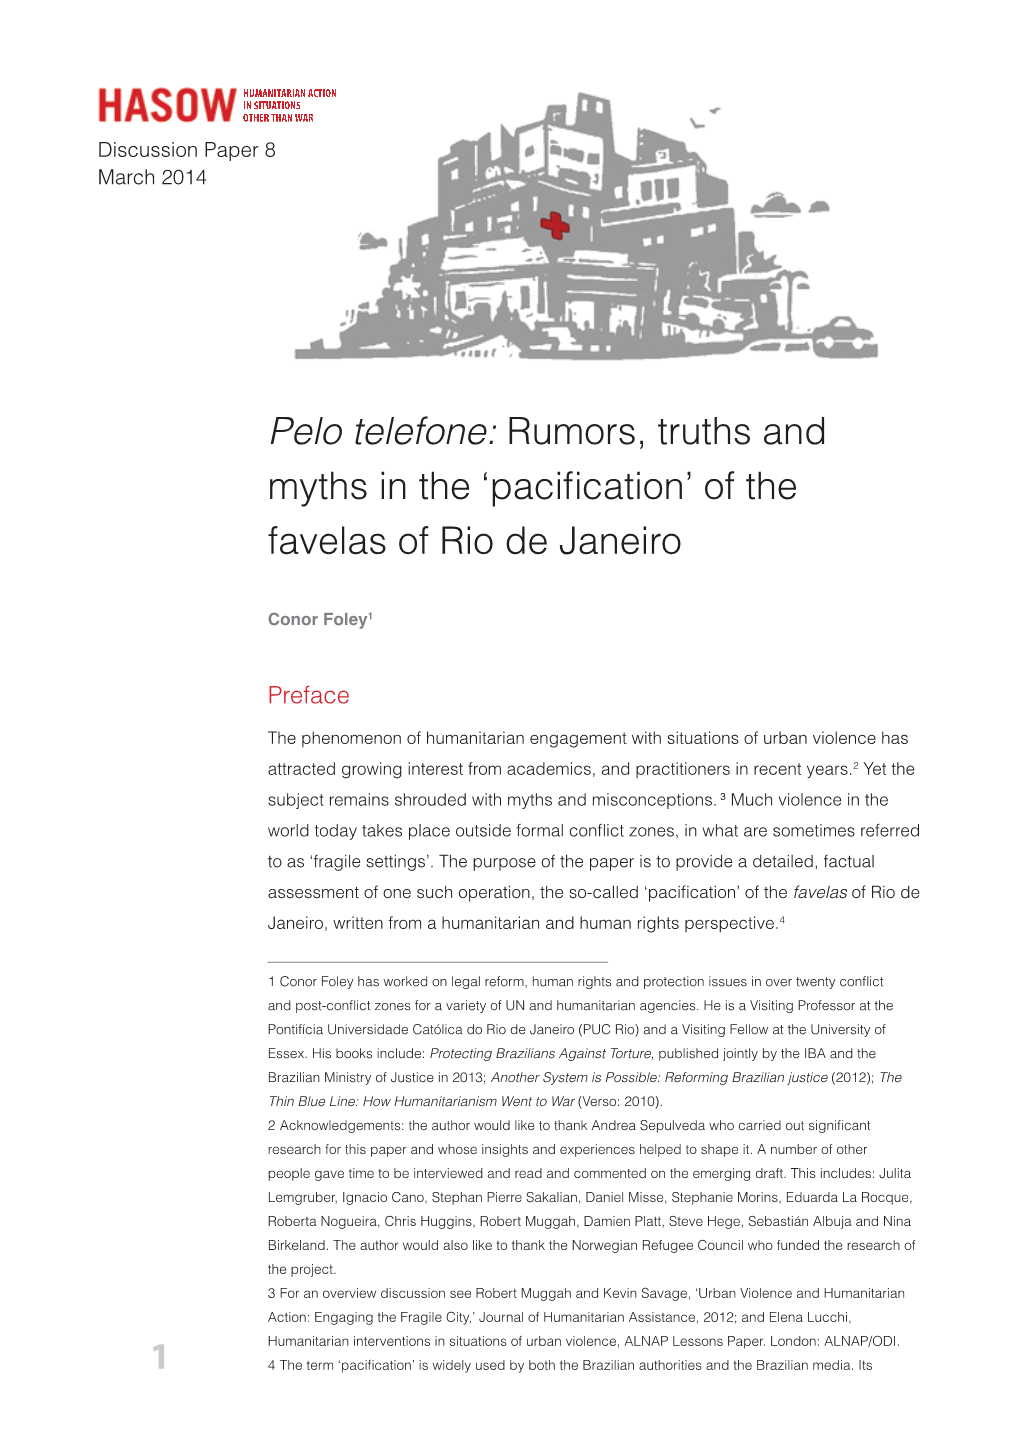 Pelo Telefone: Rumors, Truths and Myths in the 'Pacification' of The